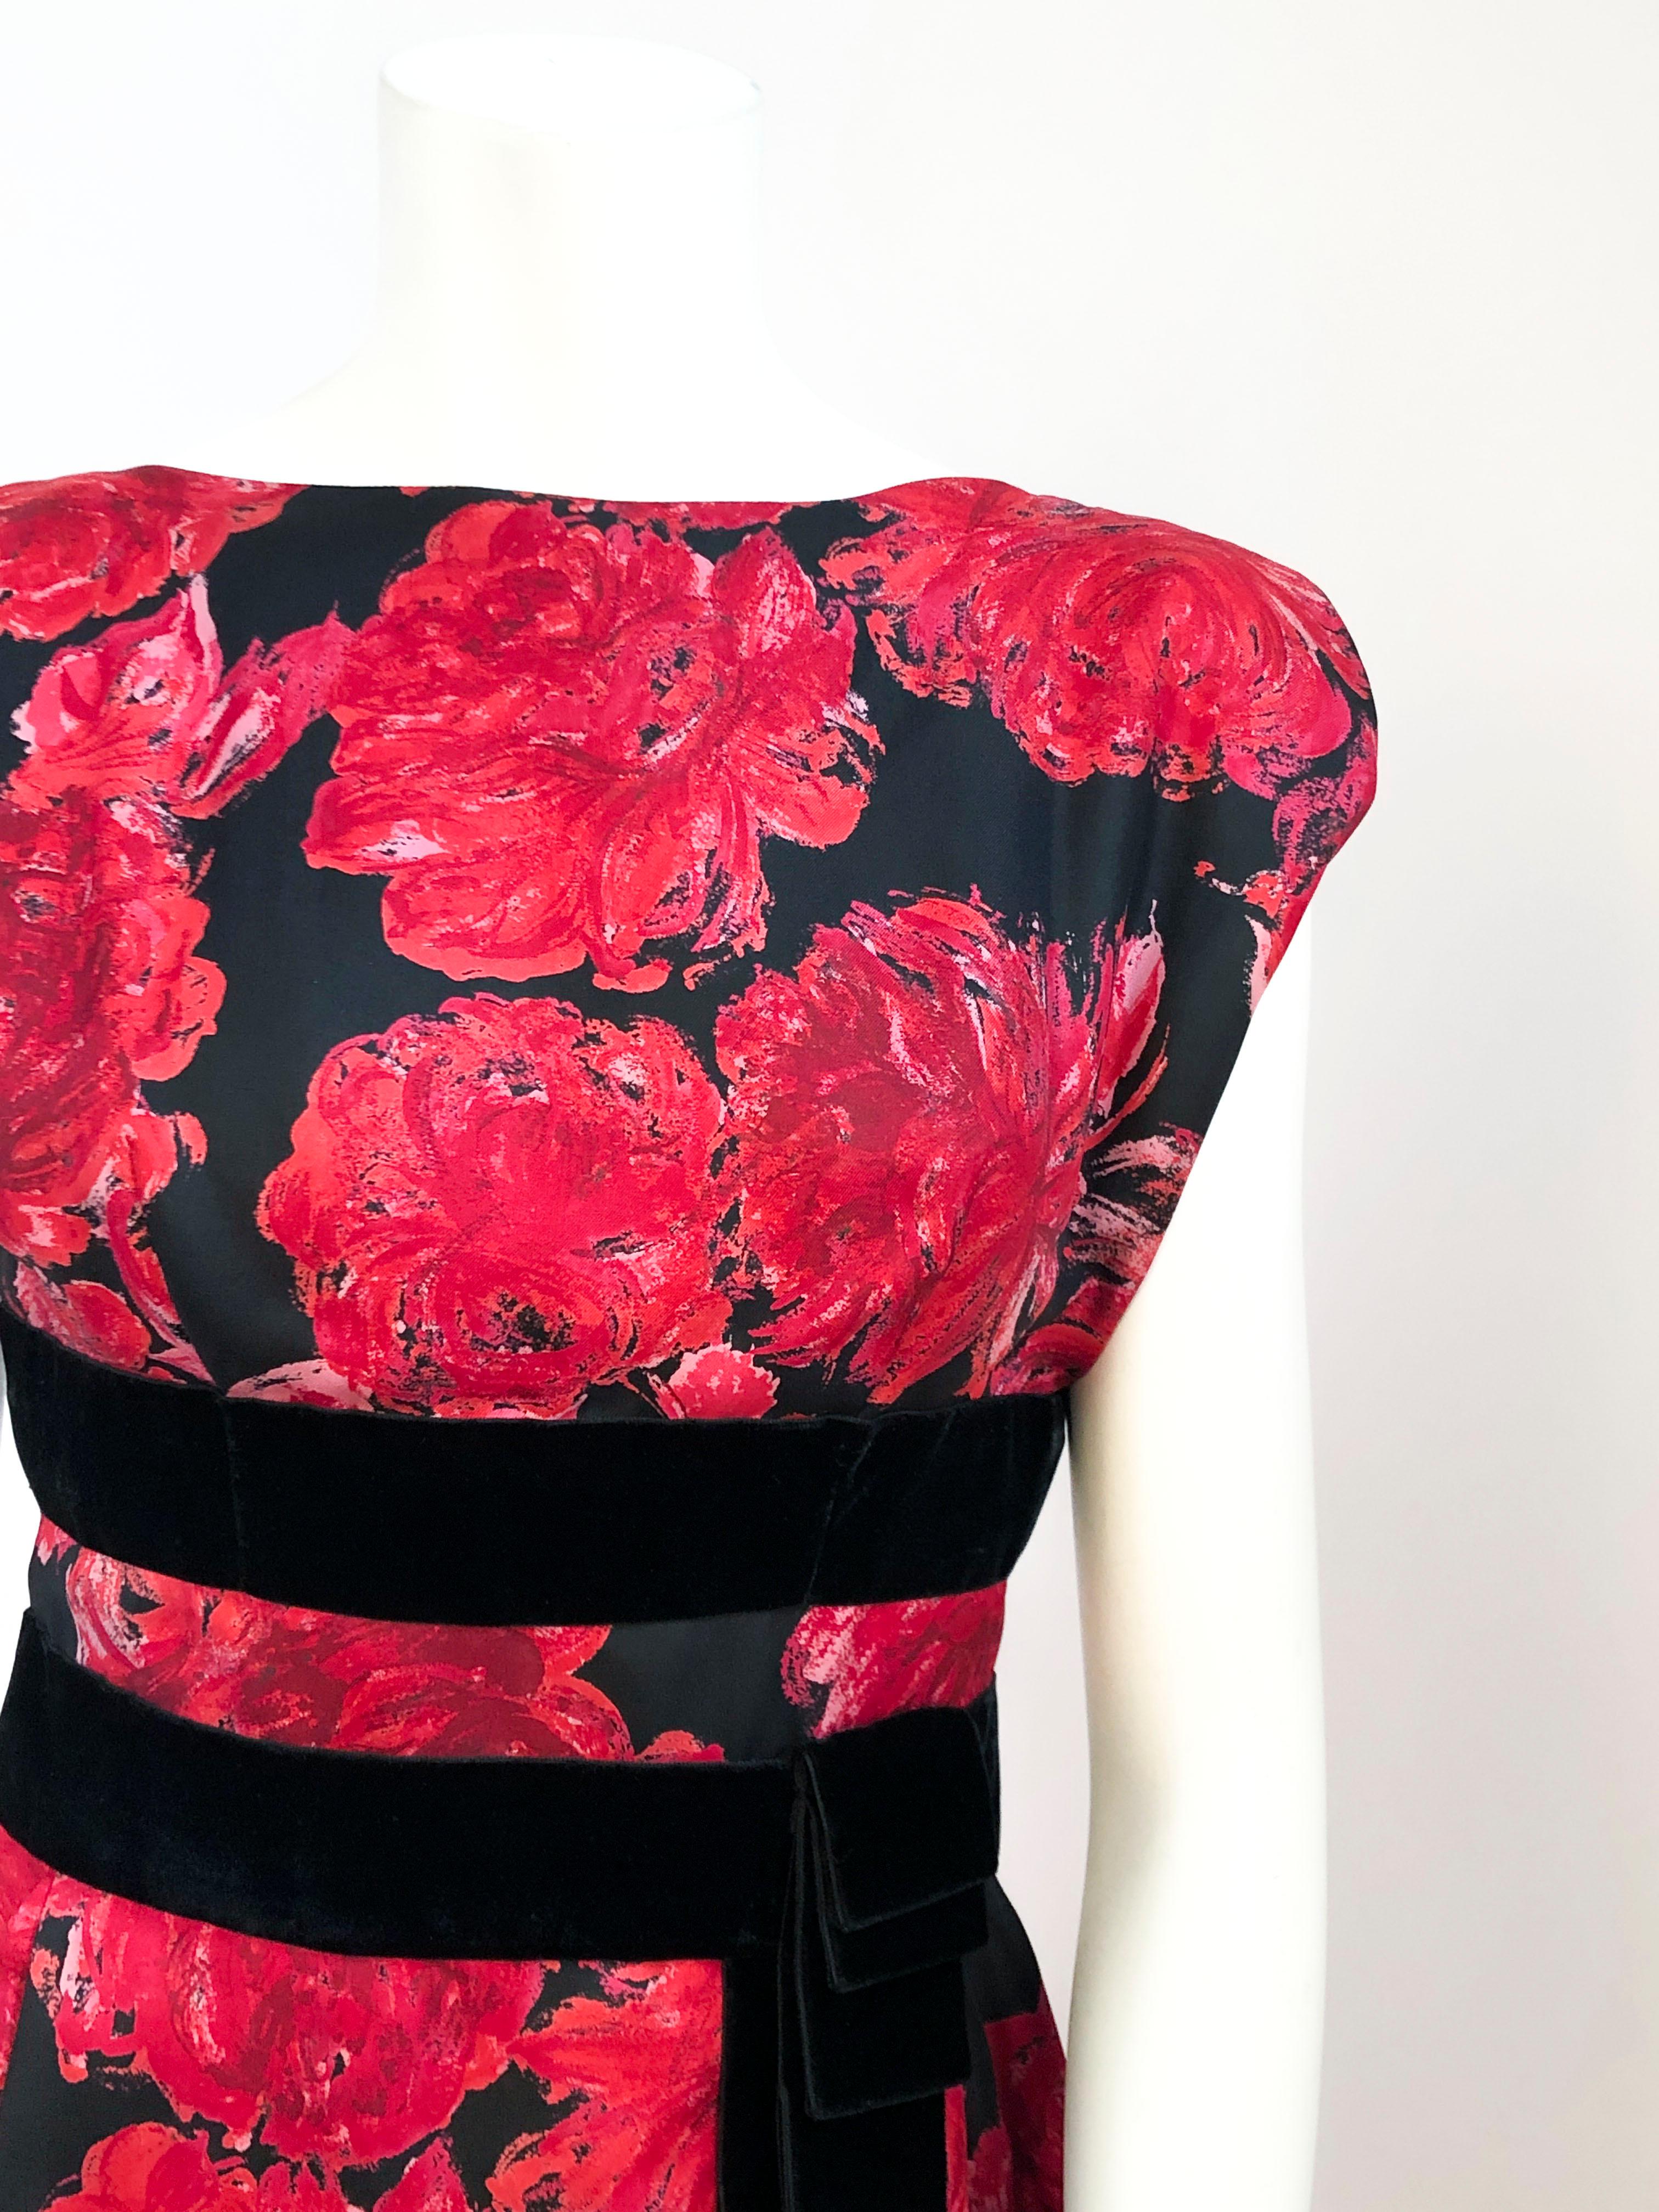 Silk dress with an impressionistic red-toned floral print with black fore-color. The waist is extenuated by dual applied strips of velvet that is finished with a layered, decorated flounce. It has a boat neck on the face of the dress and a low back